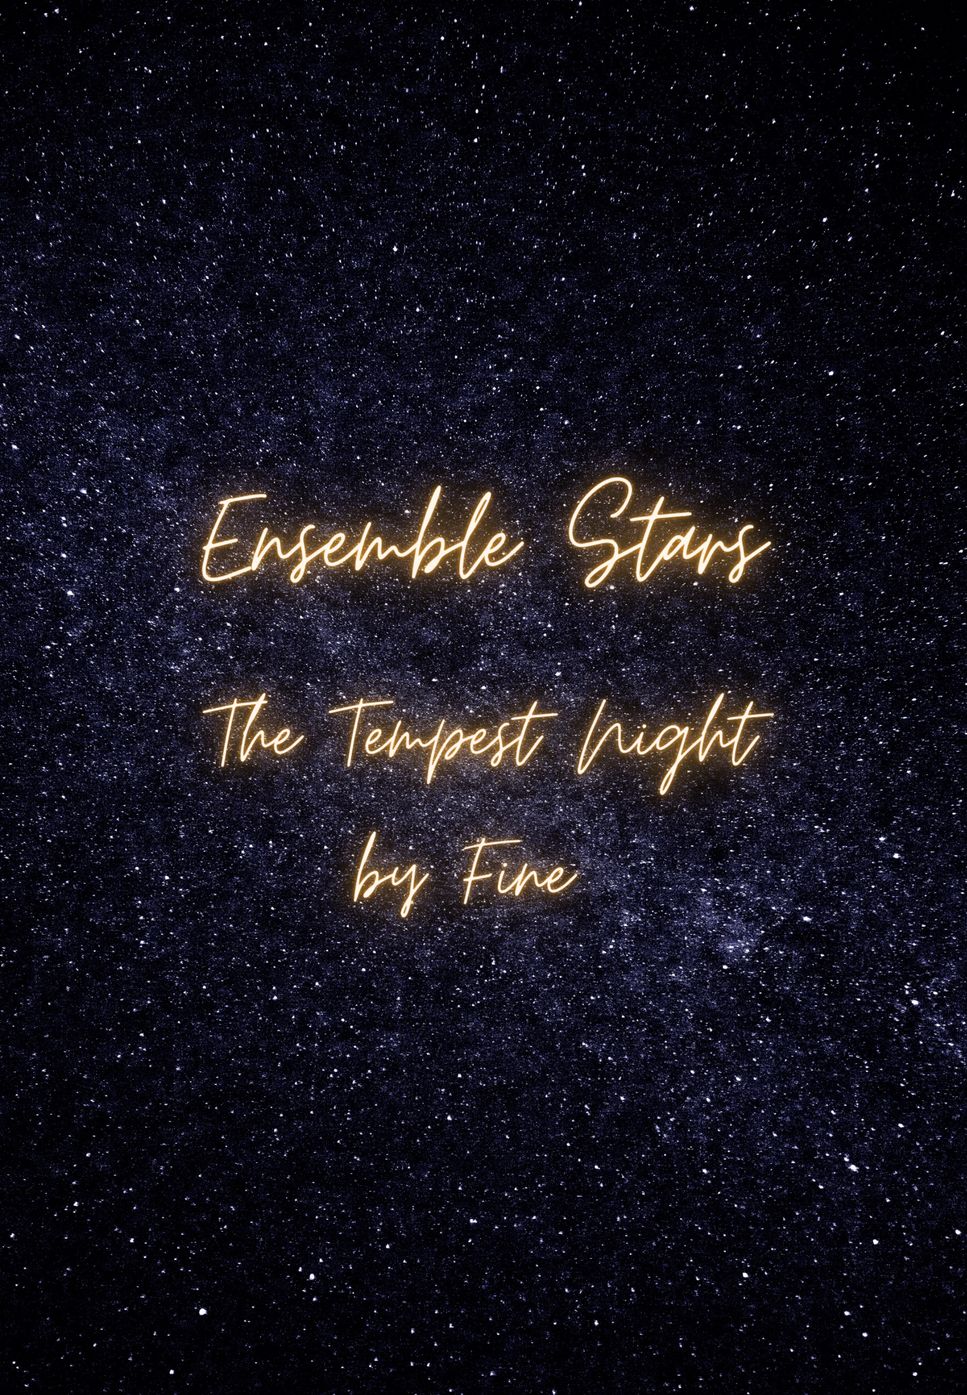 ENSEMBLE STARS!! - fine - the tempest night by Esther